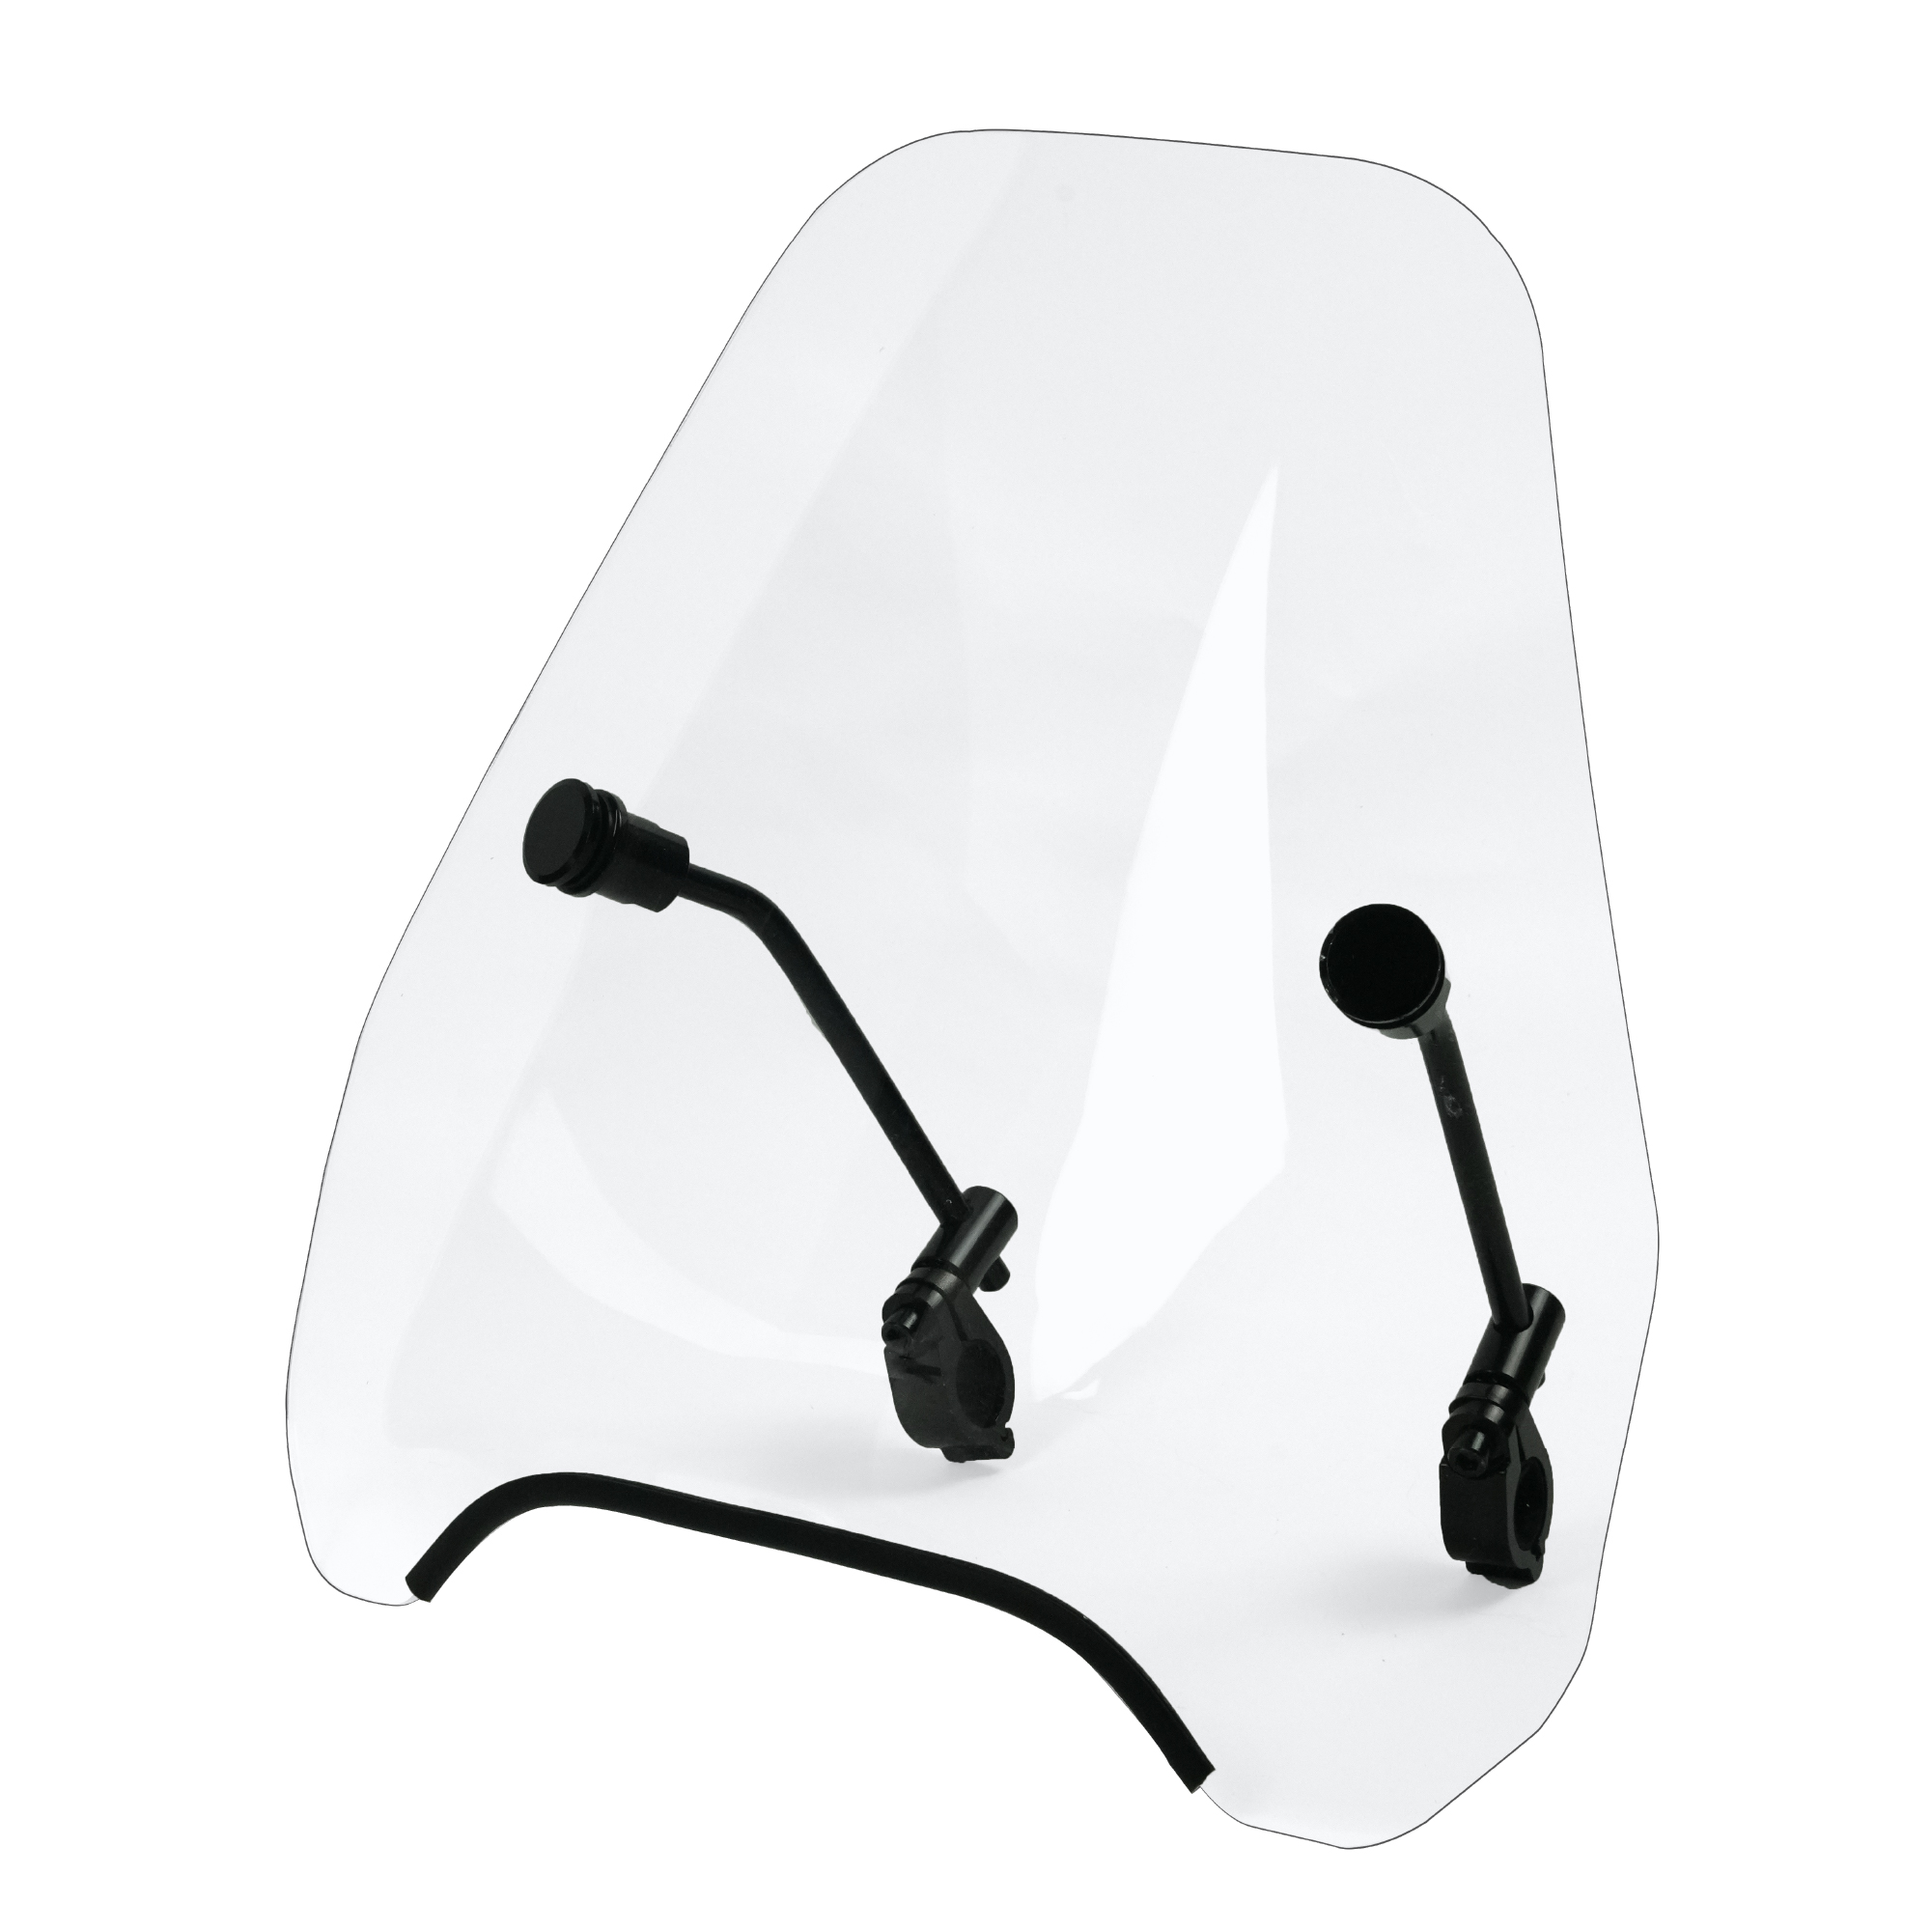 Krator 15" Clear Tinted Windscreen Windshield Compatible with Victory Vegas (2003-2012) Fits 7/8" or 1" Handlebars